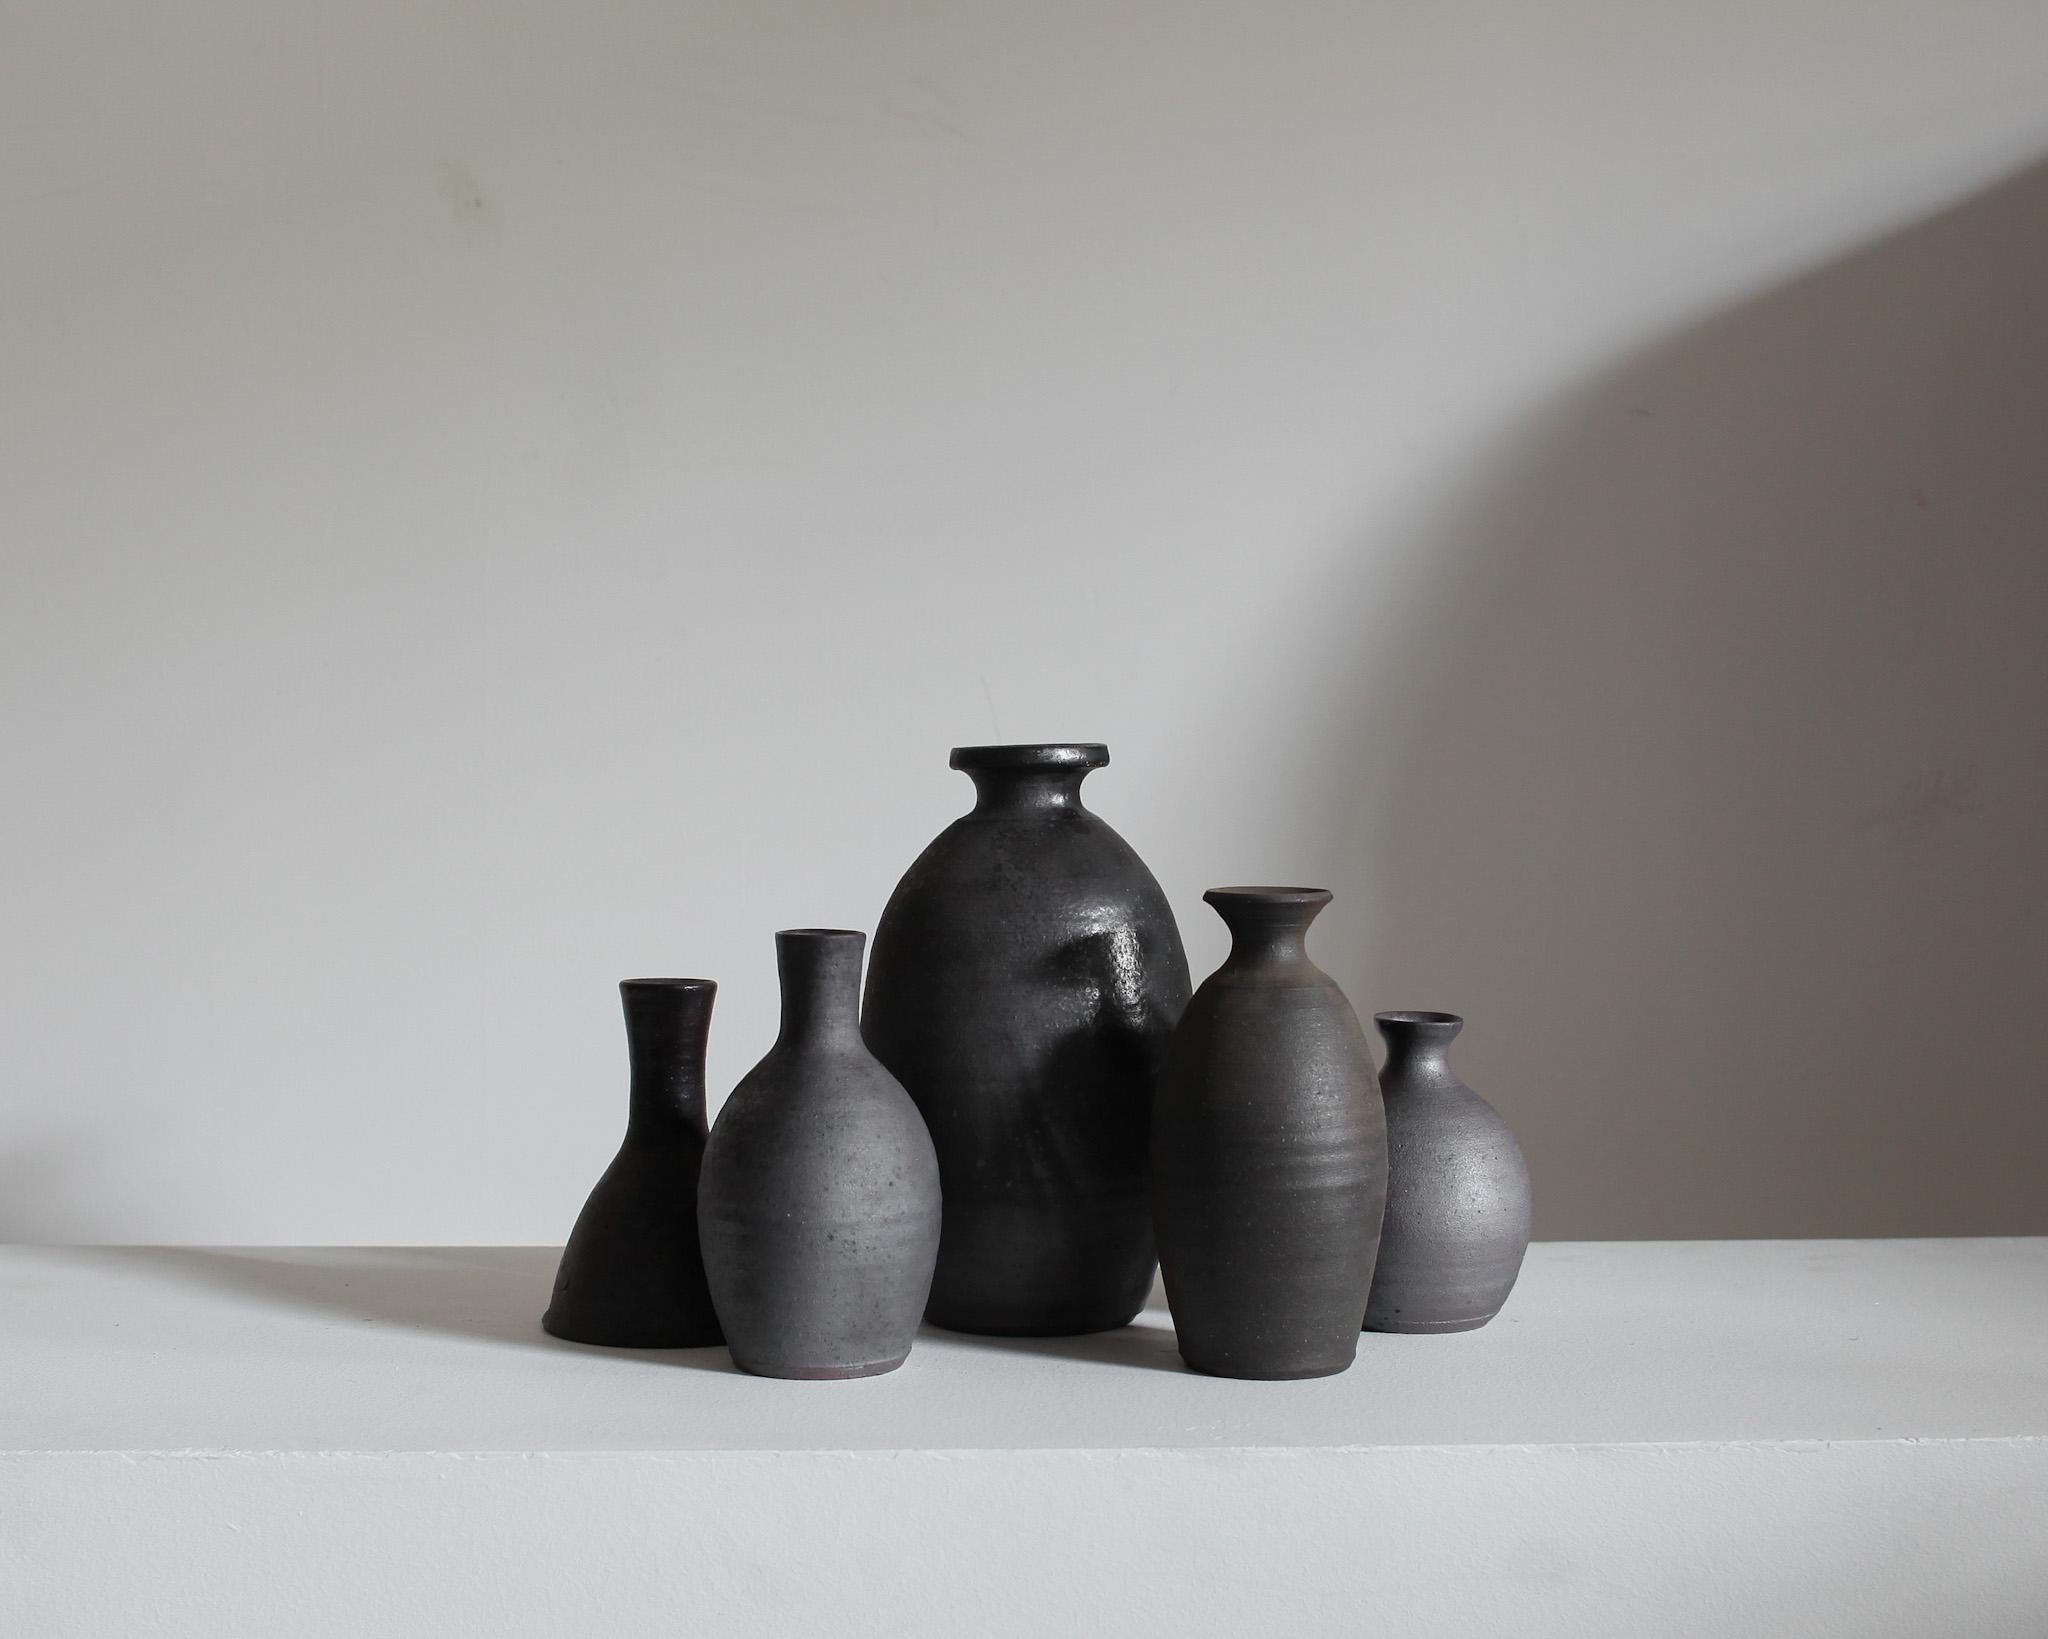 A collection of five unique blackened stoneware/ceramic vessels from the famous pottery town of Mashiko, Japan.

Sourced from the former studio of a Mashiko lifetime potter.

These tactile vessels all display an earthy wabi-sabi aesthetic.

Most of